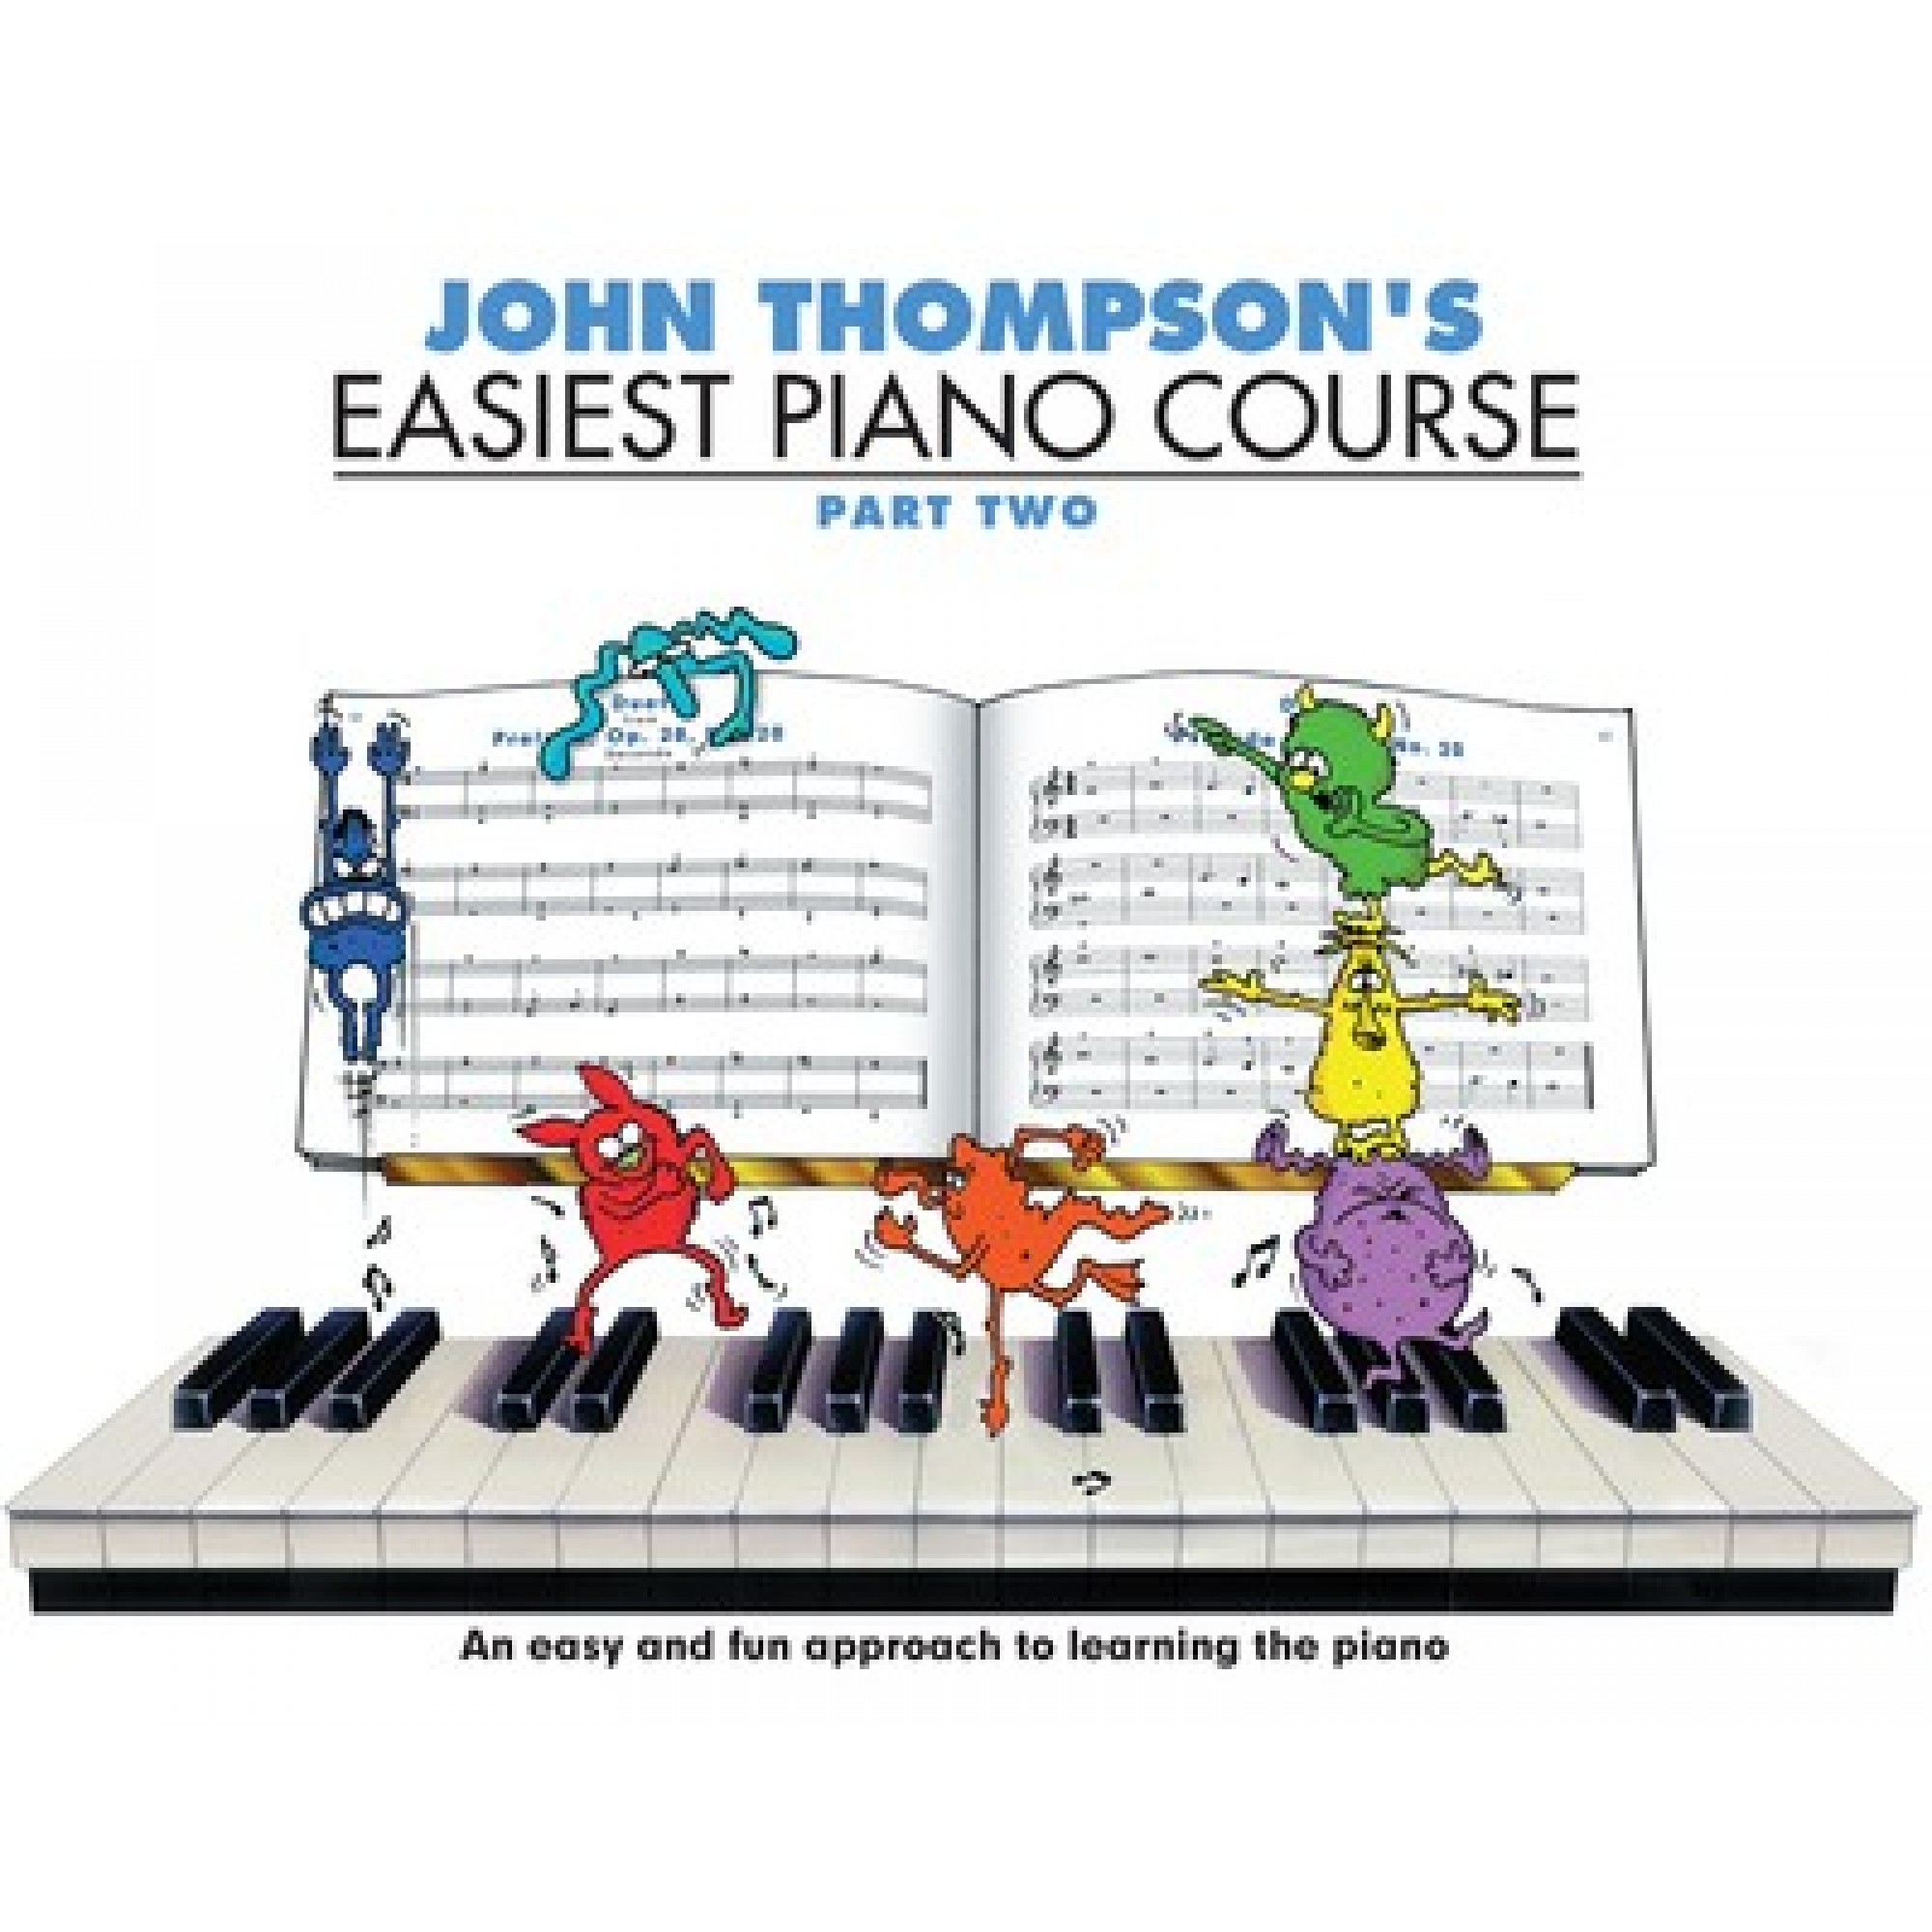 Easiest Piano Course Part 2 by John Thompson Australia's 1 Music Store. Zip Accepted